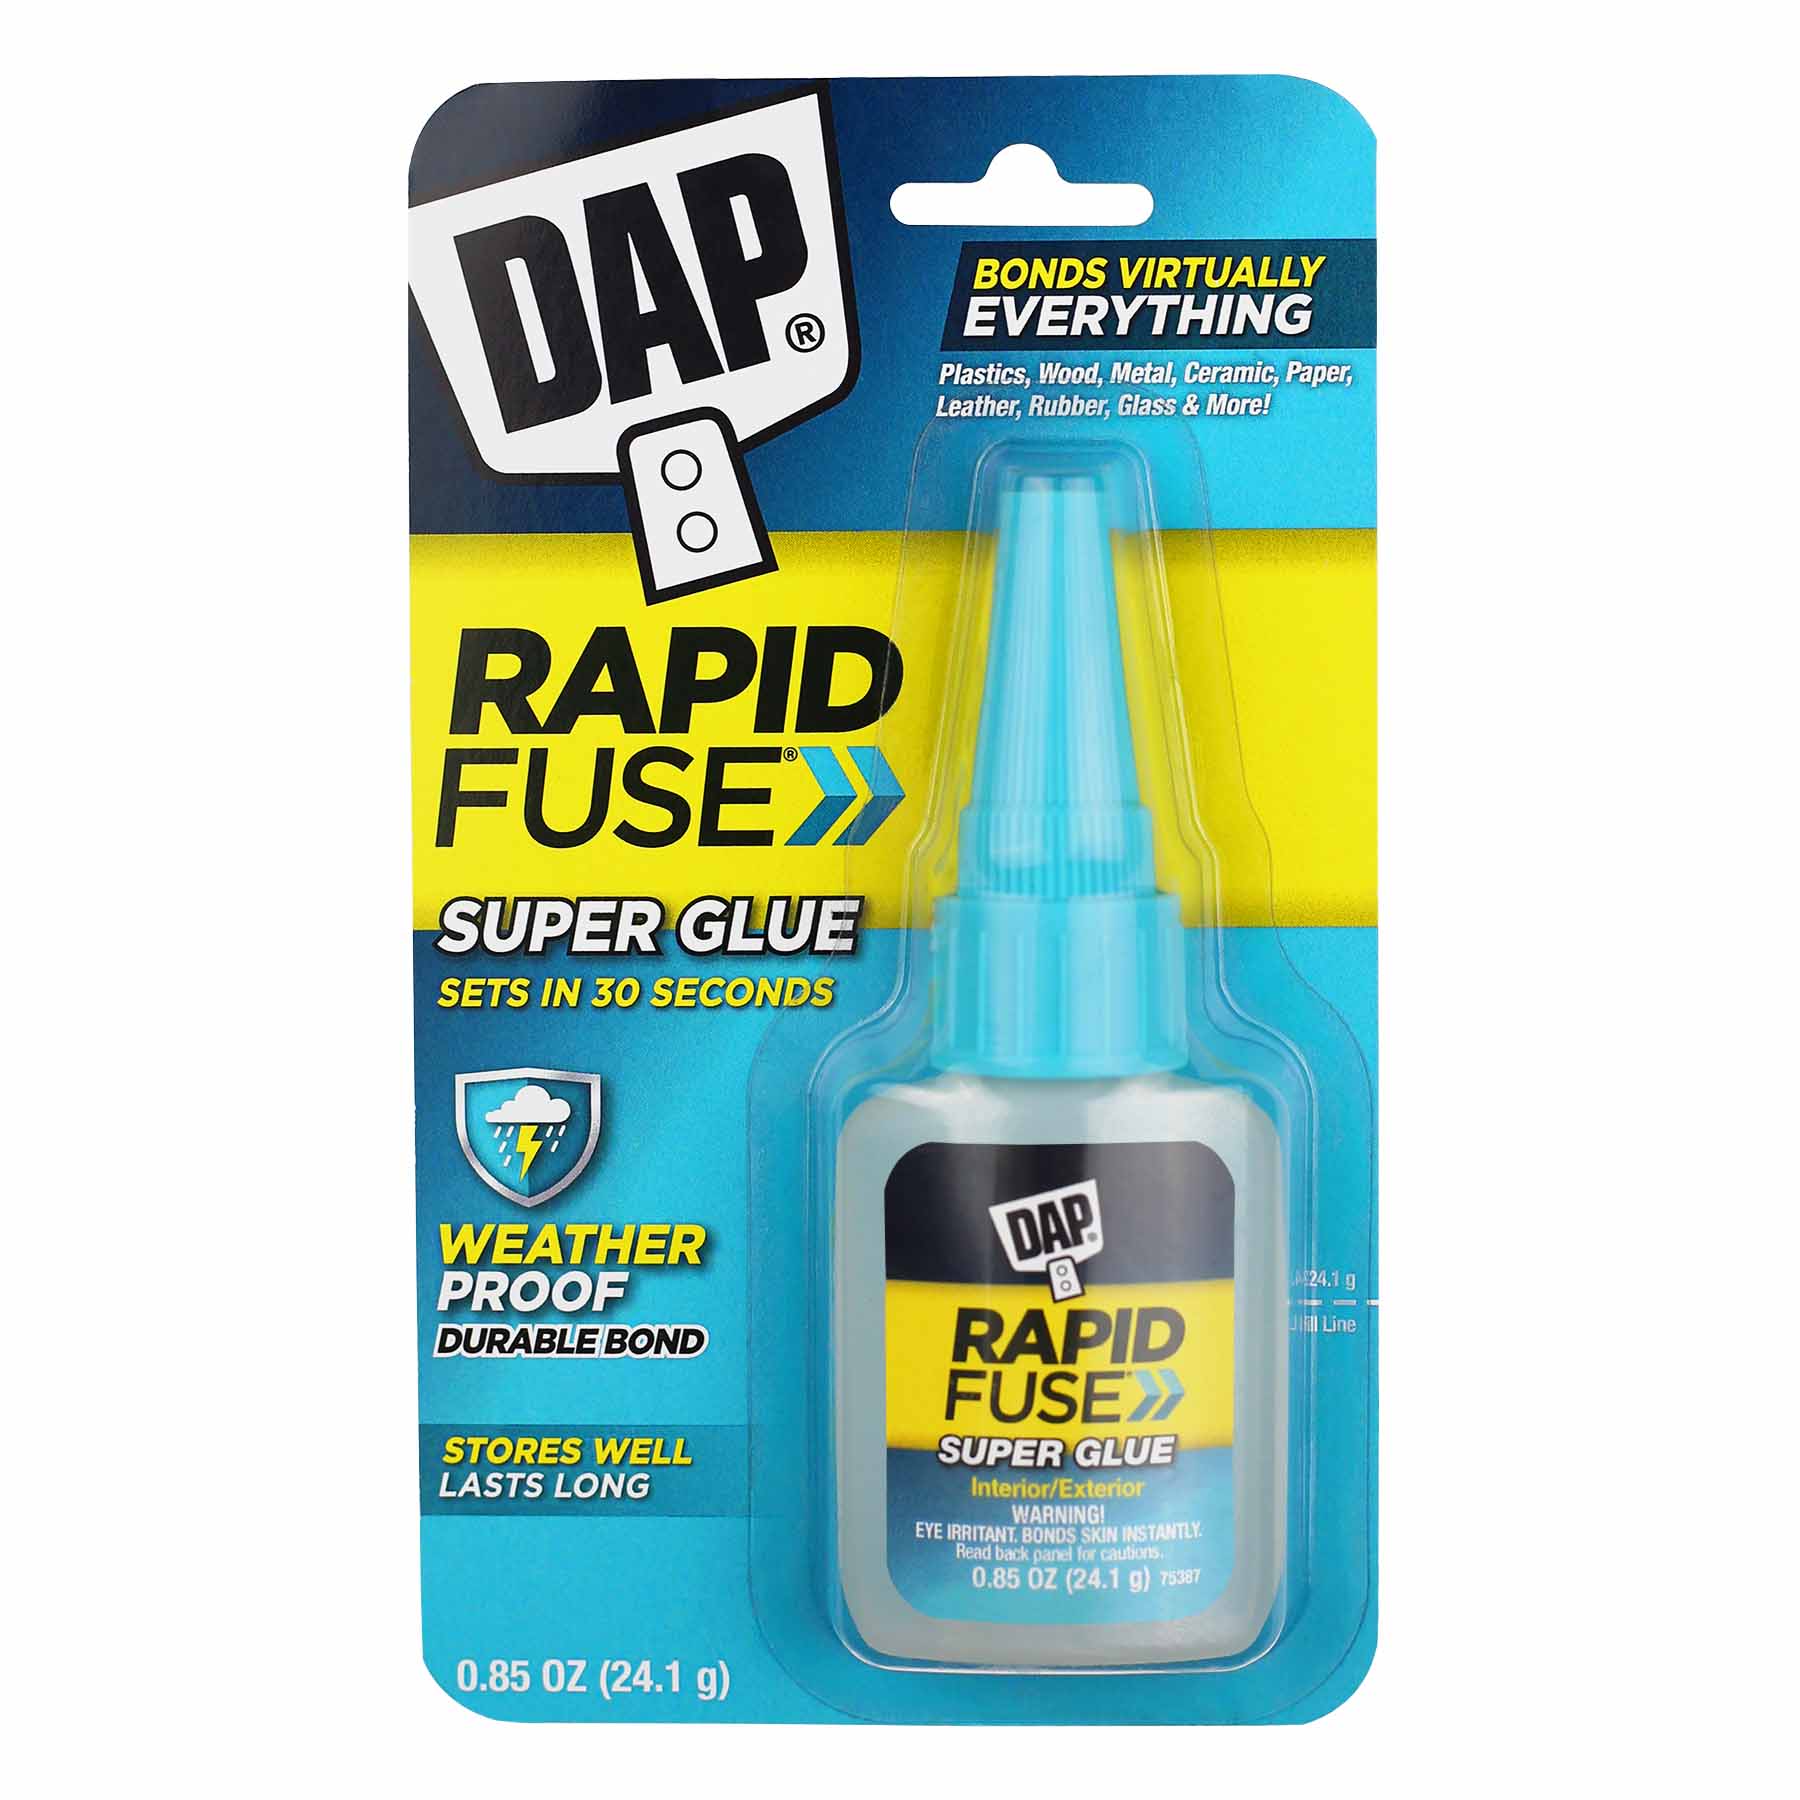 RapidFuse© Ultra Clear All Purpose Adhesive